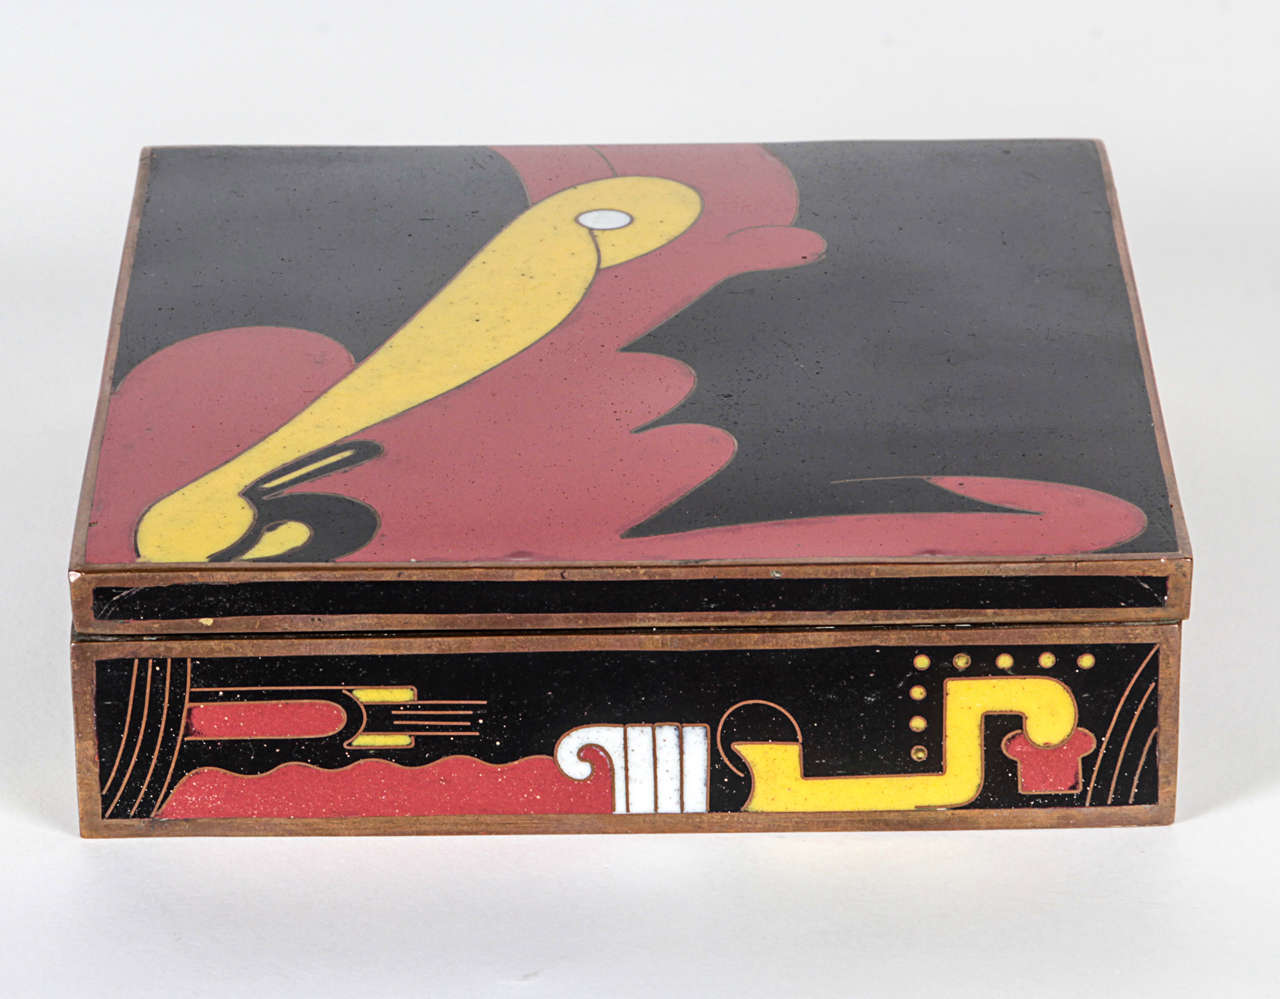 CHINESE ART DECO

Covered Box c.1930

Cloisonne enamel in a fantasy motif of red, yellow, black and white abstract designs on a bronze body with a blue enameled underside and a wood lined interior